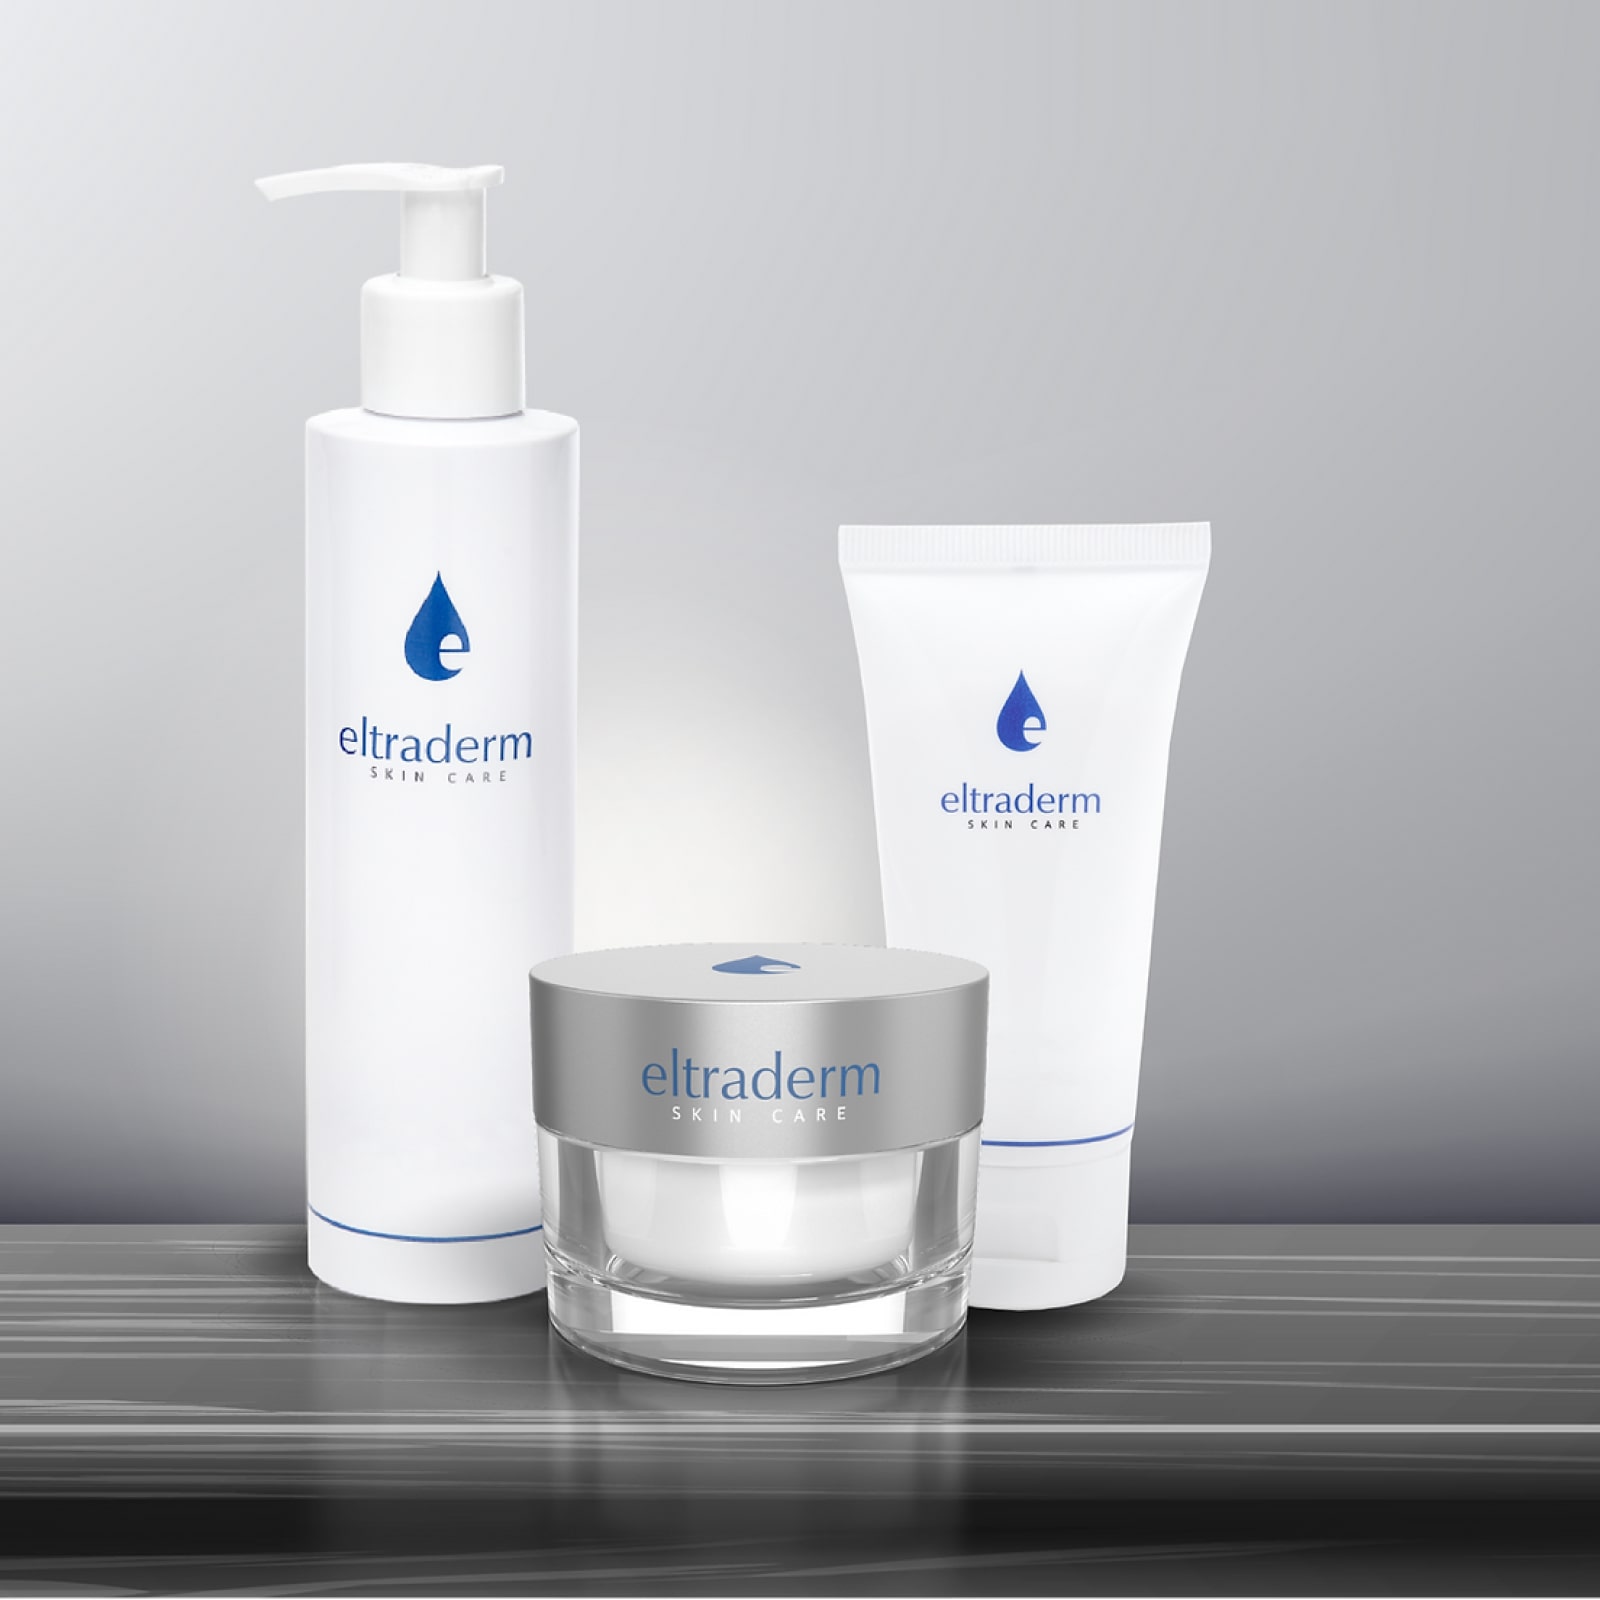 Eltraderm products